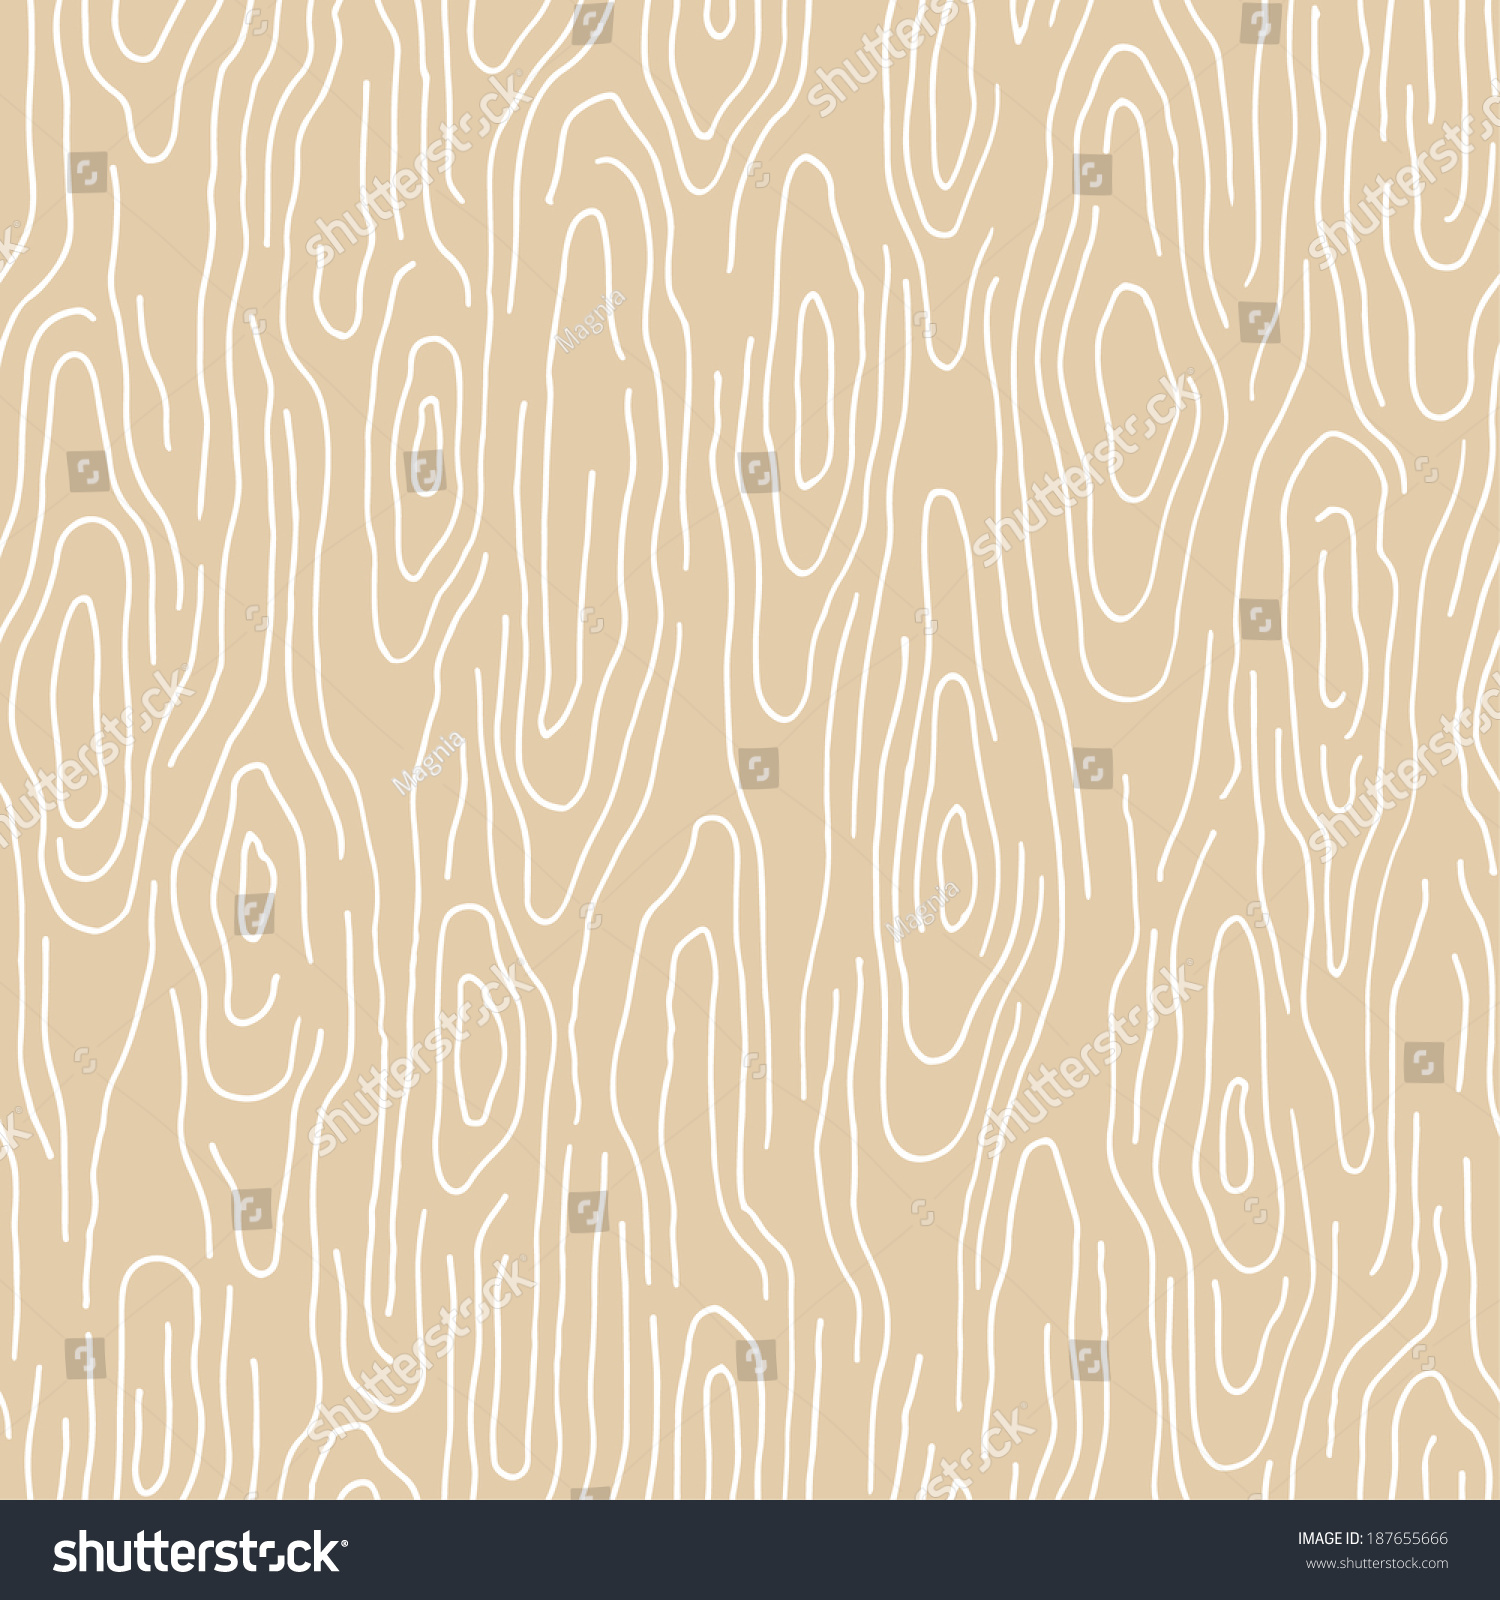 Seamless Hand Drawn Wood Texture Vector Stock Vector (Royalty Free